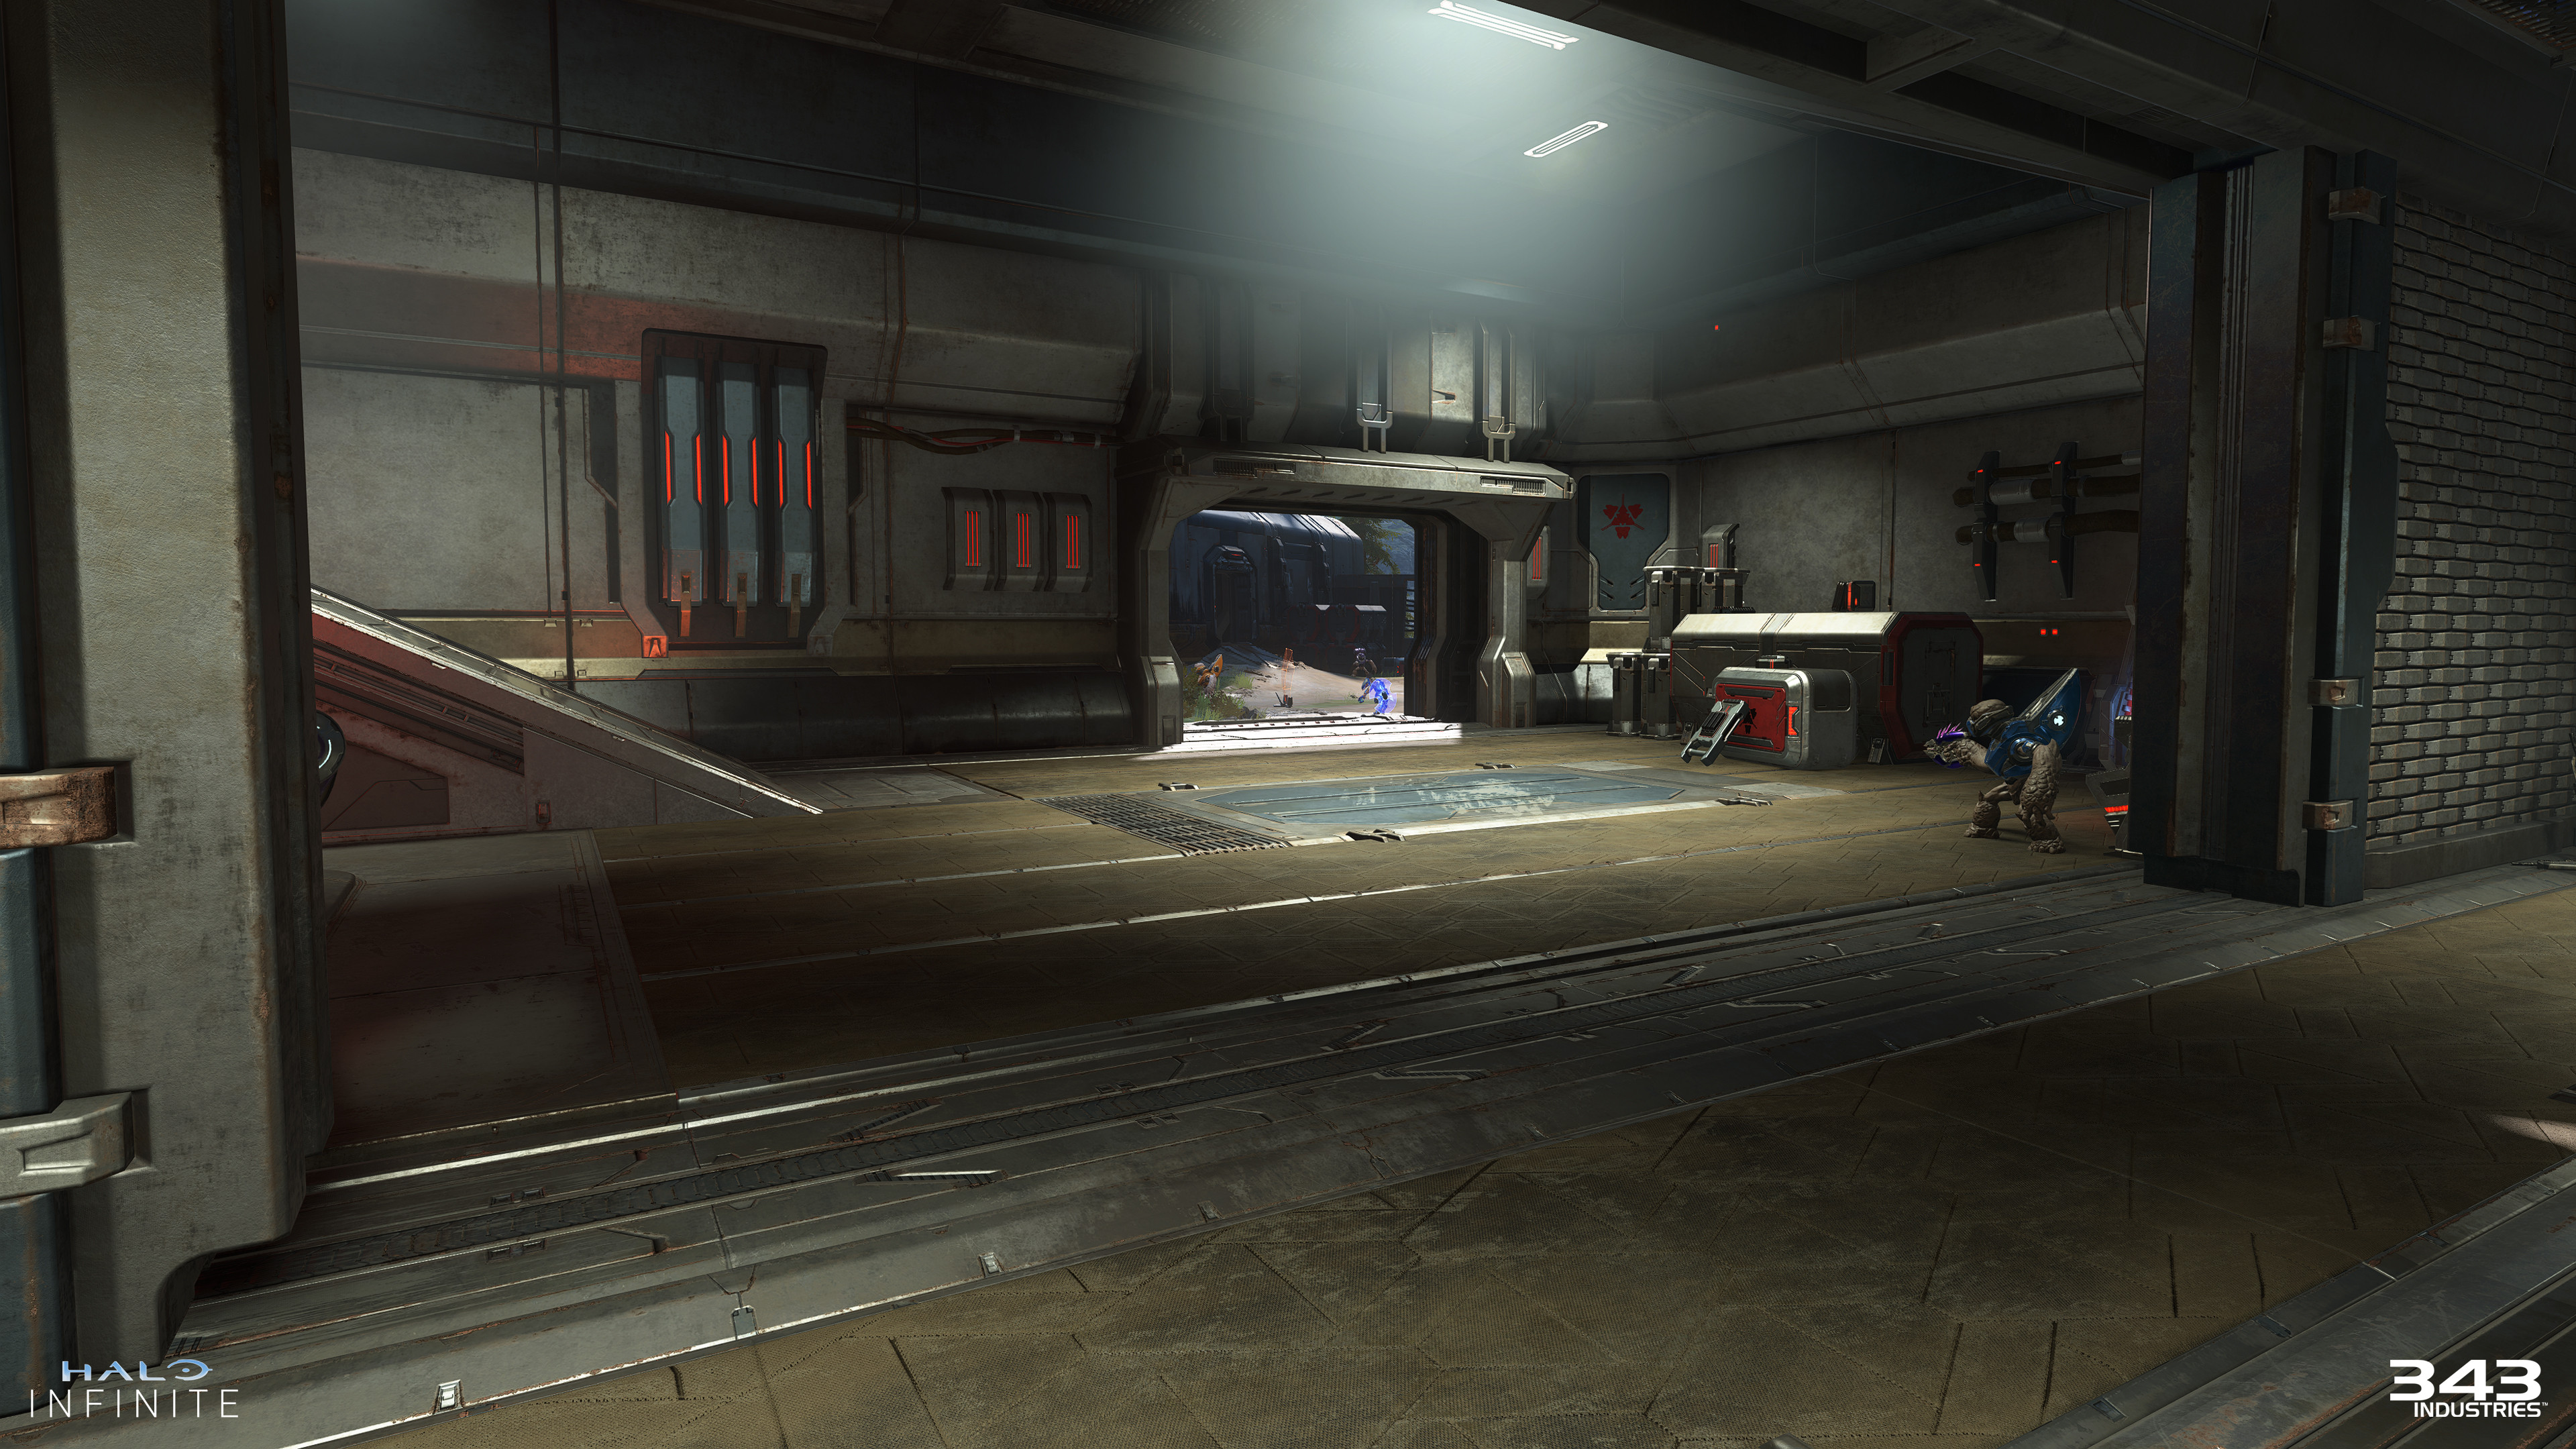 The smaller banished droppod bases all utilized locally placed cubemaps throughout not only this outpost, but the rest of the outposts around Zeta Halo.